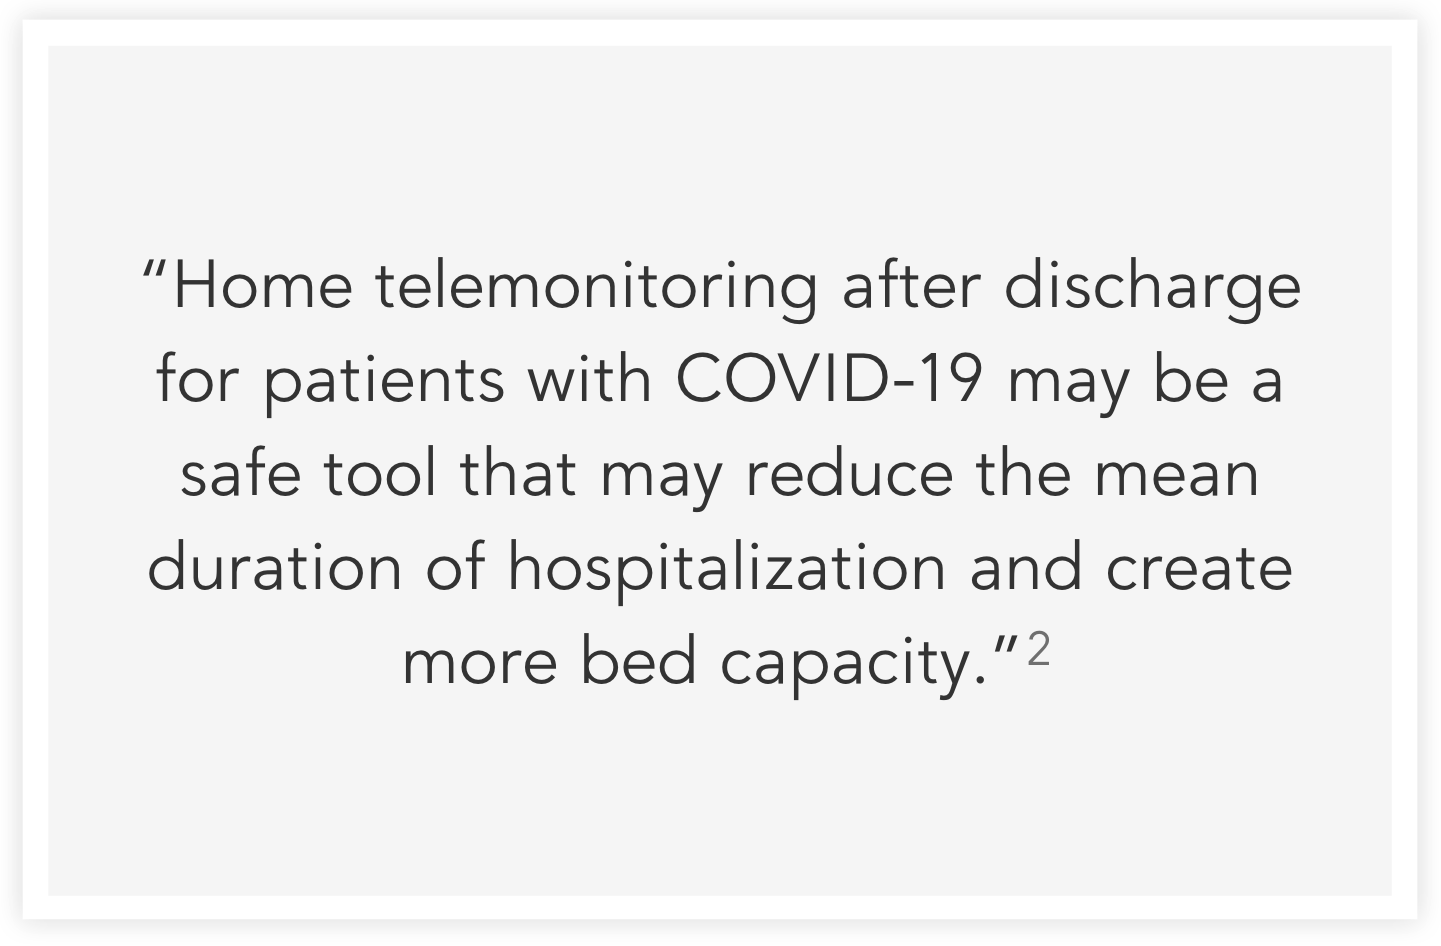 home telemonitoring may be a safe tool to reduce duration of hospitalization